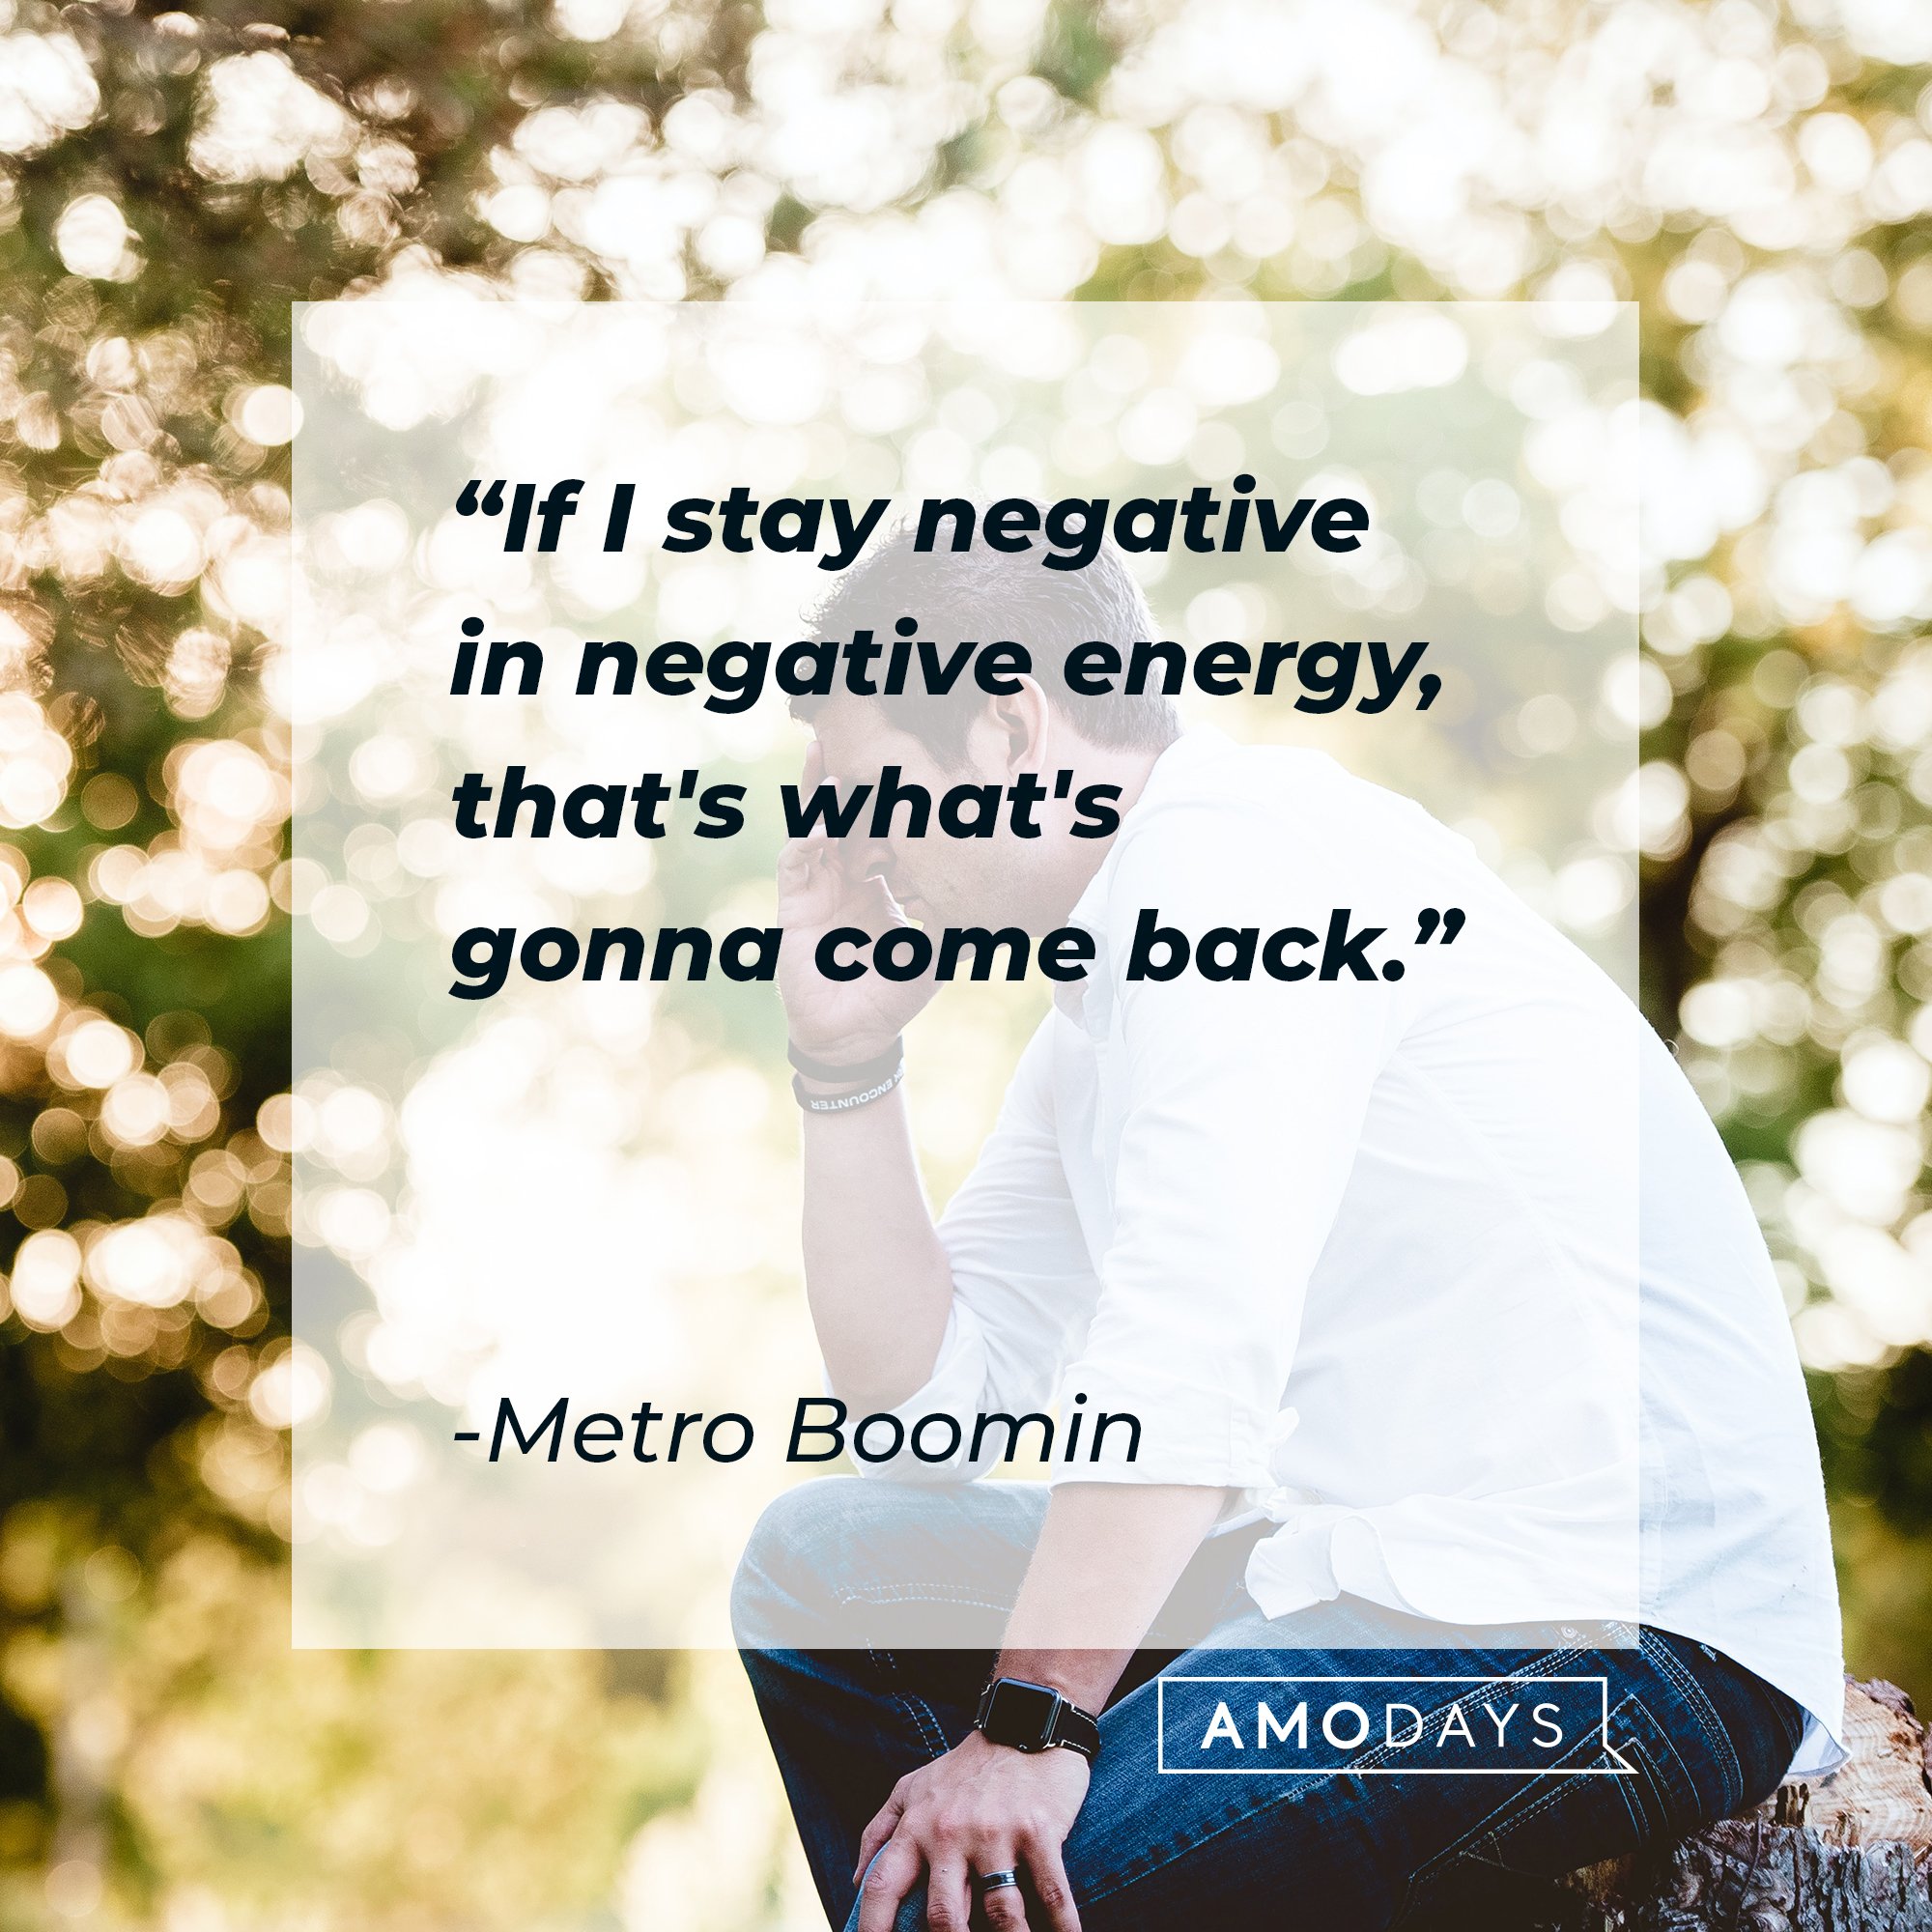 Metro Boomin’s quote: "If I stay negative in negative energy, that's what's gonna come back." | Image: AmoDays